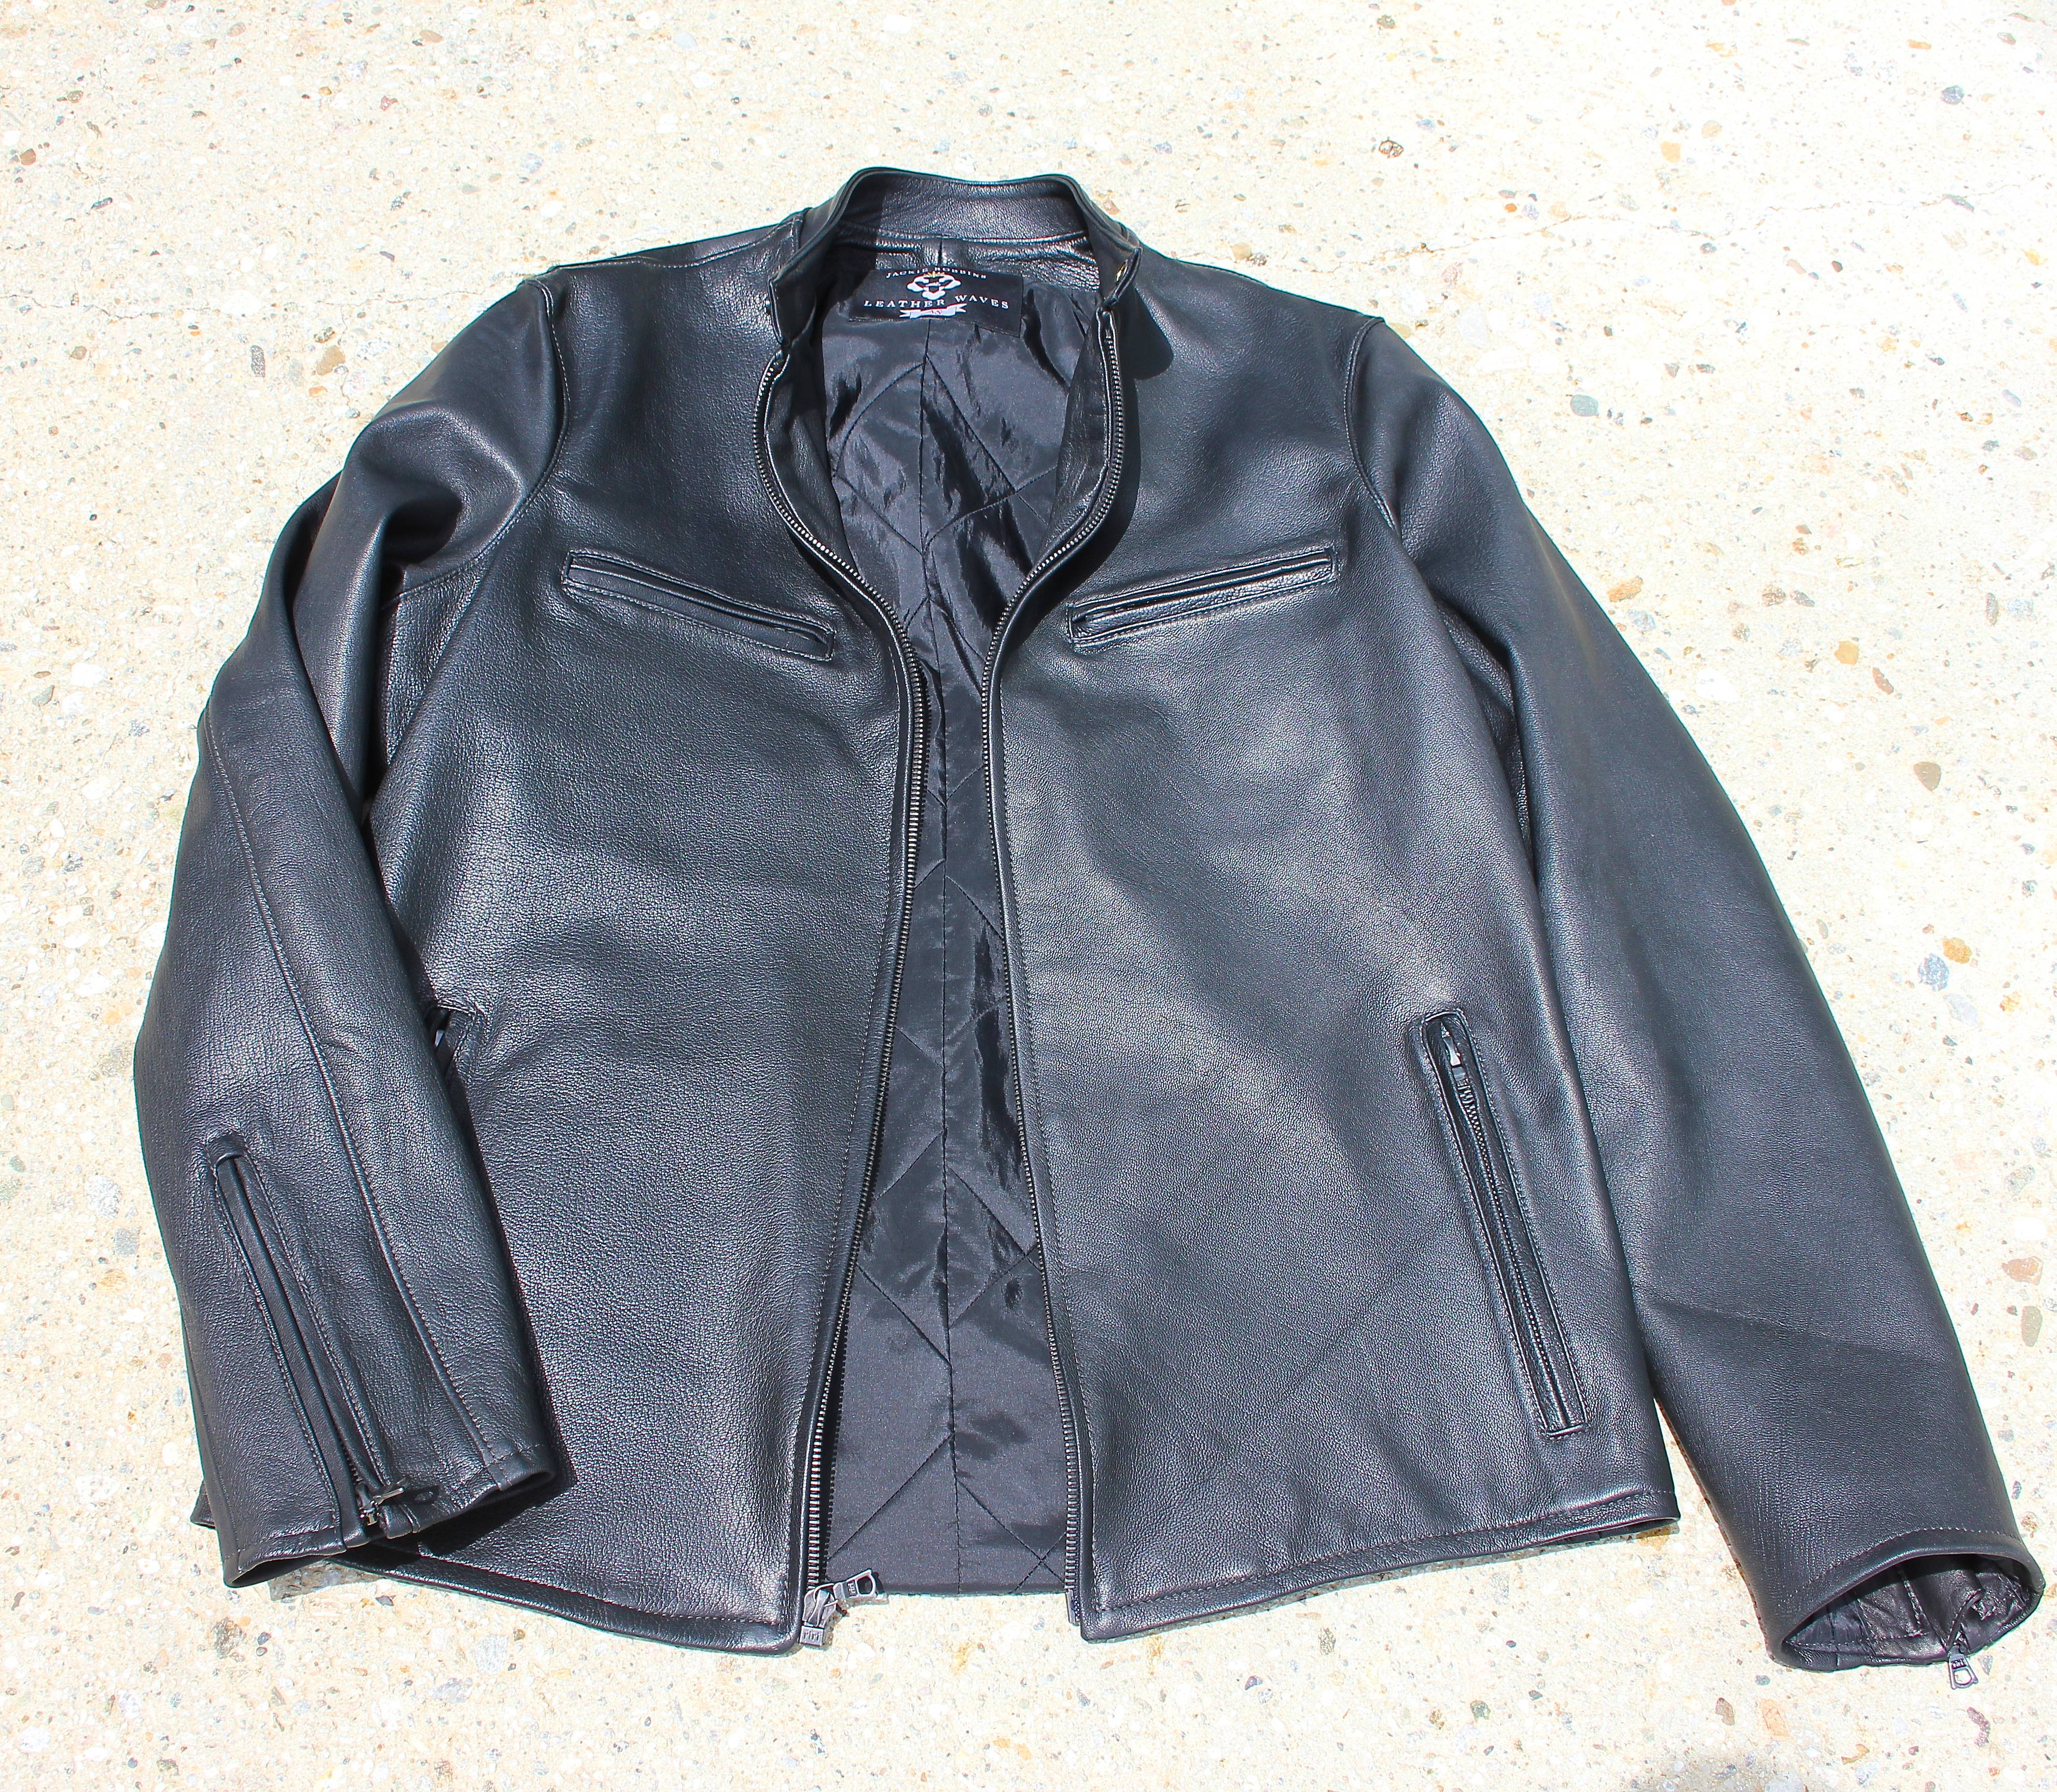 Urban-Wear-Mens-Leather-Motorcycle-Jacket-from-Jackie-Robbins-Leather-Waves